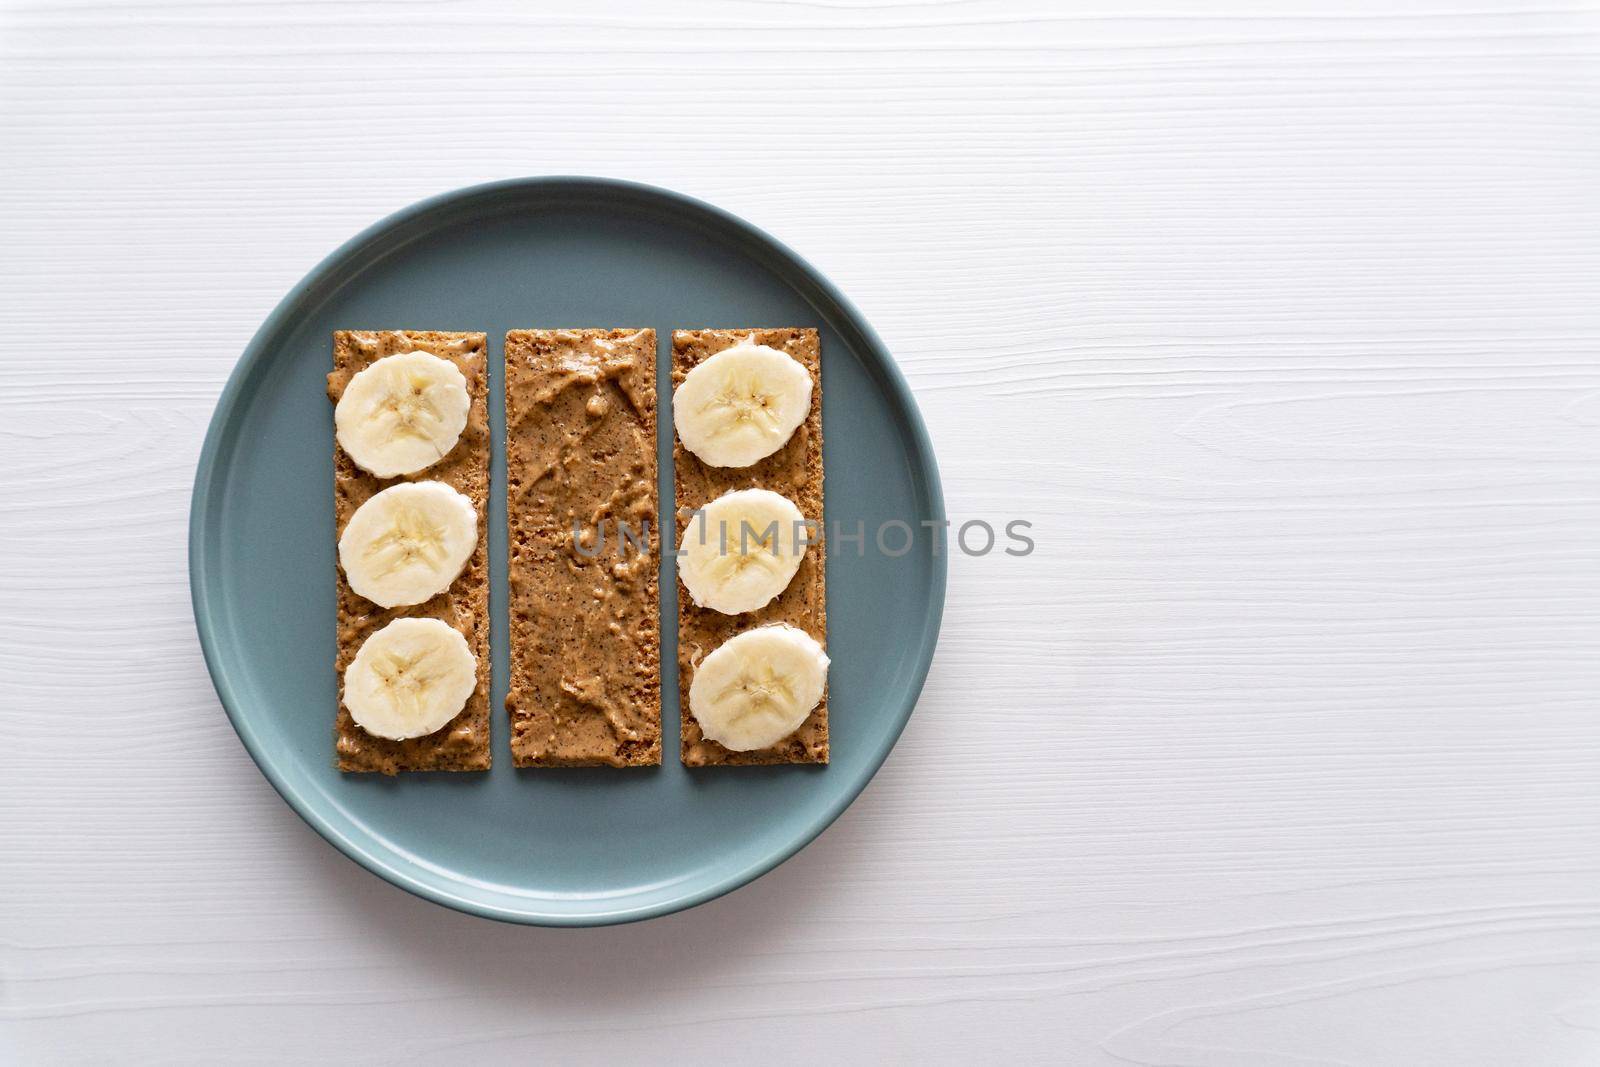 Toasts with peanut butter and banana on round plane on white table, snack for morning breakfast, minimal concept, healthy eating